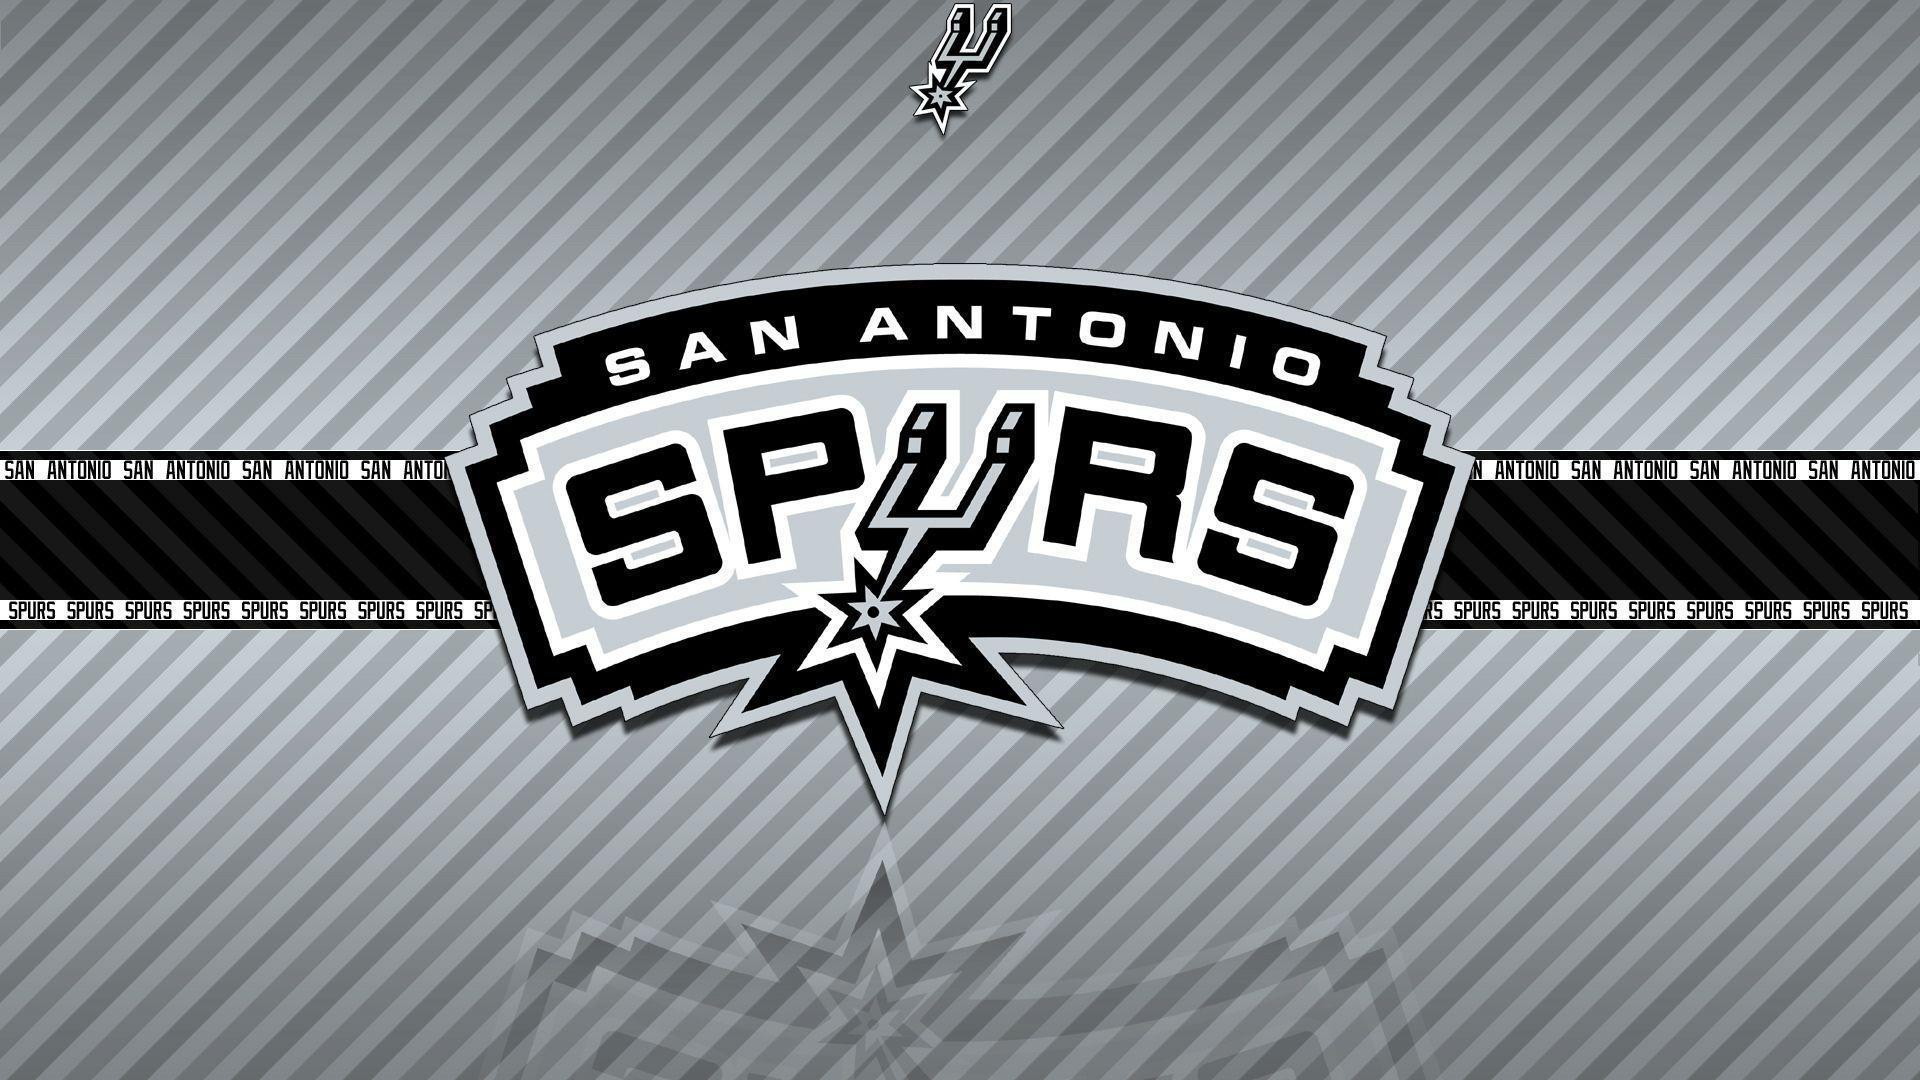 HD Desktop Wallpaper San Antonio Spurs Logo with high-resolution 1920x1080 pixel. You can use this wallpaper for your Desktop Computer Backgrounds, Windows or Mac Screensavers, iPhone Lock screen, Tablet or Android and another Mobile Phone device